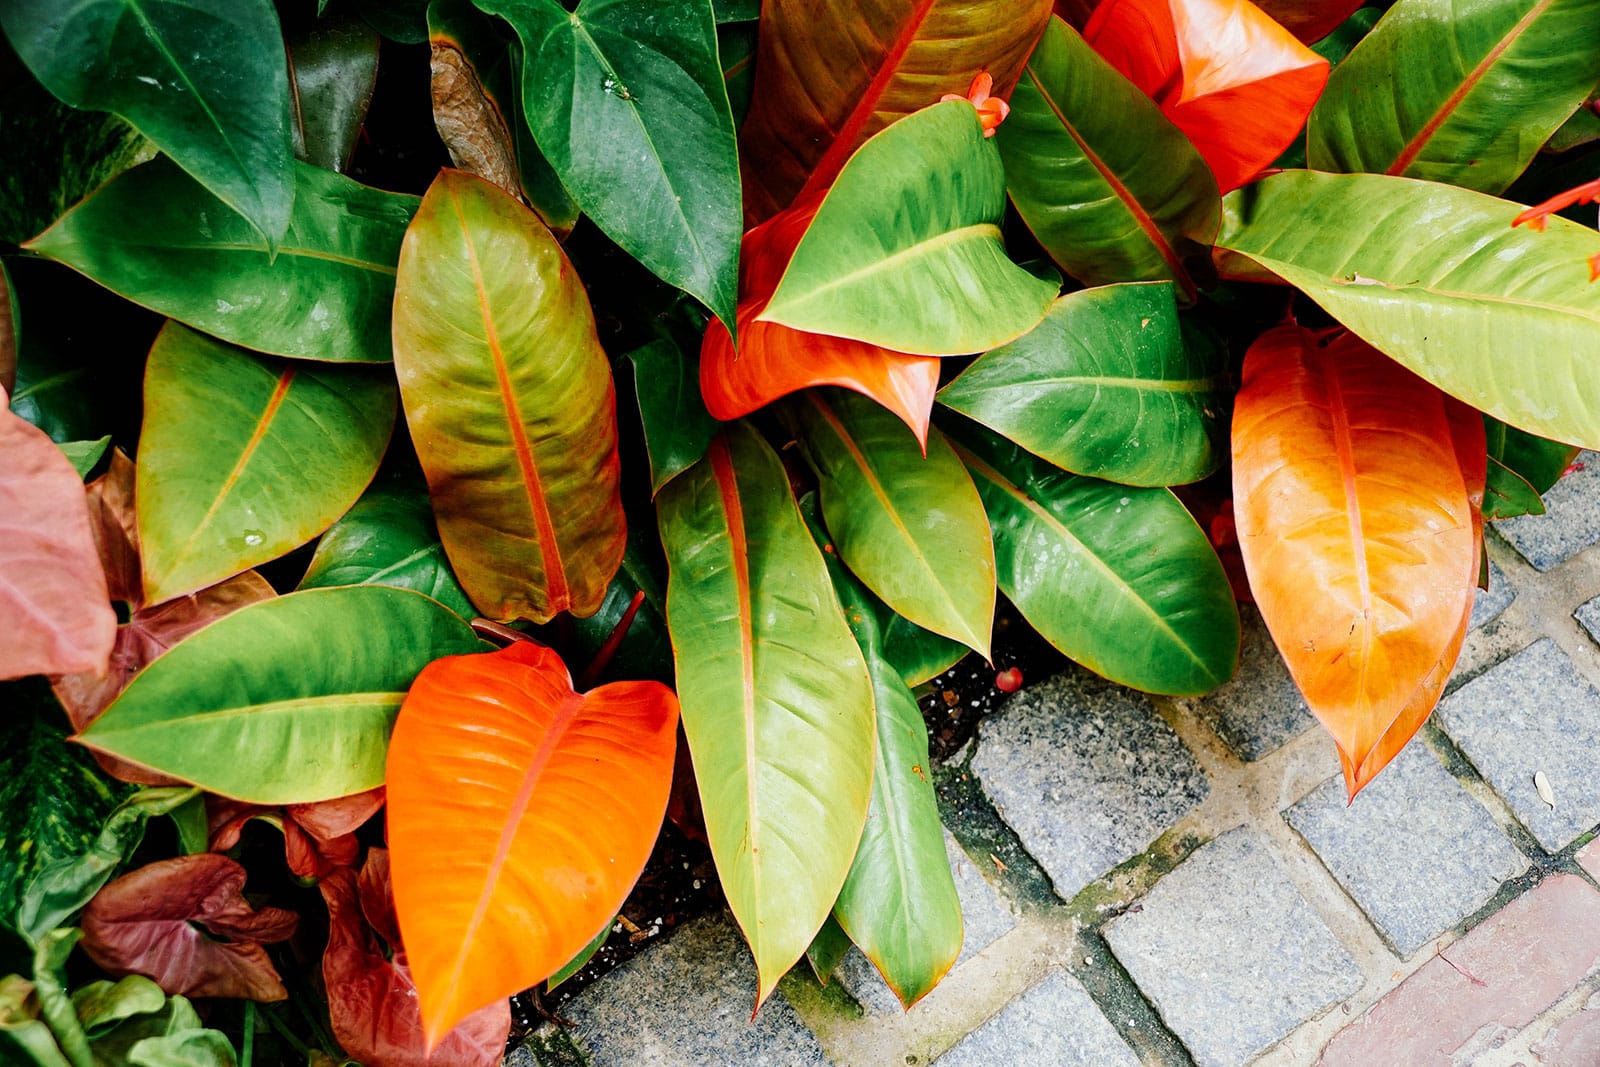 Philodendron 'Prince of Orange' plants shot outside on a paver patio